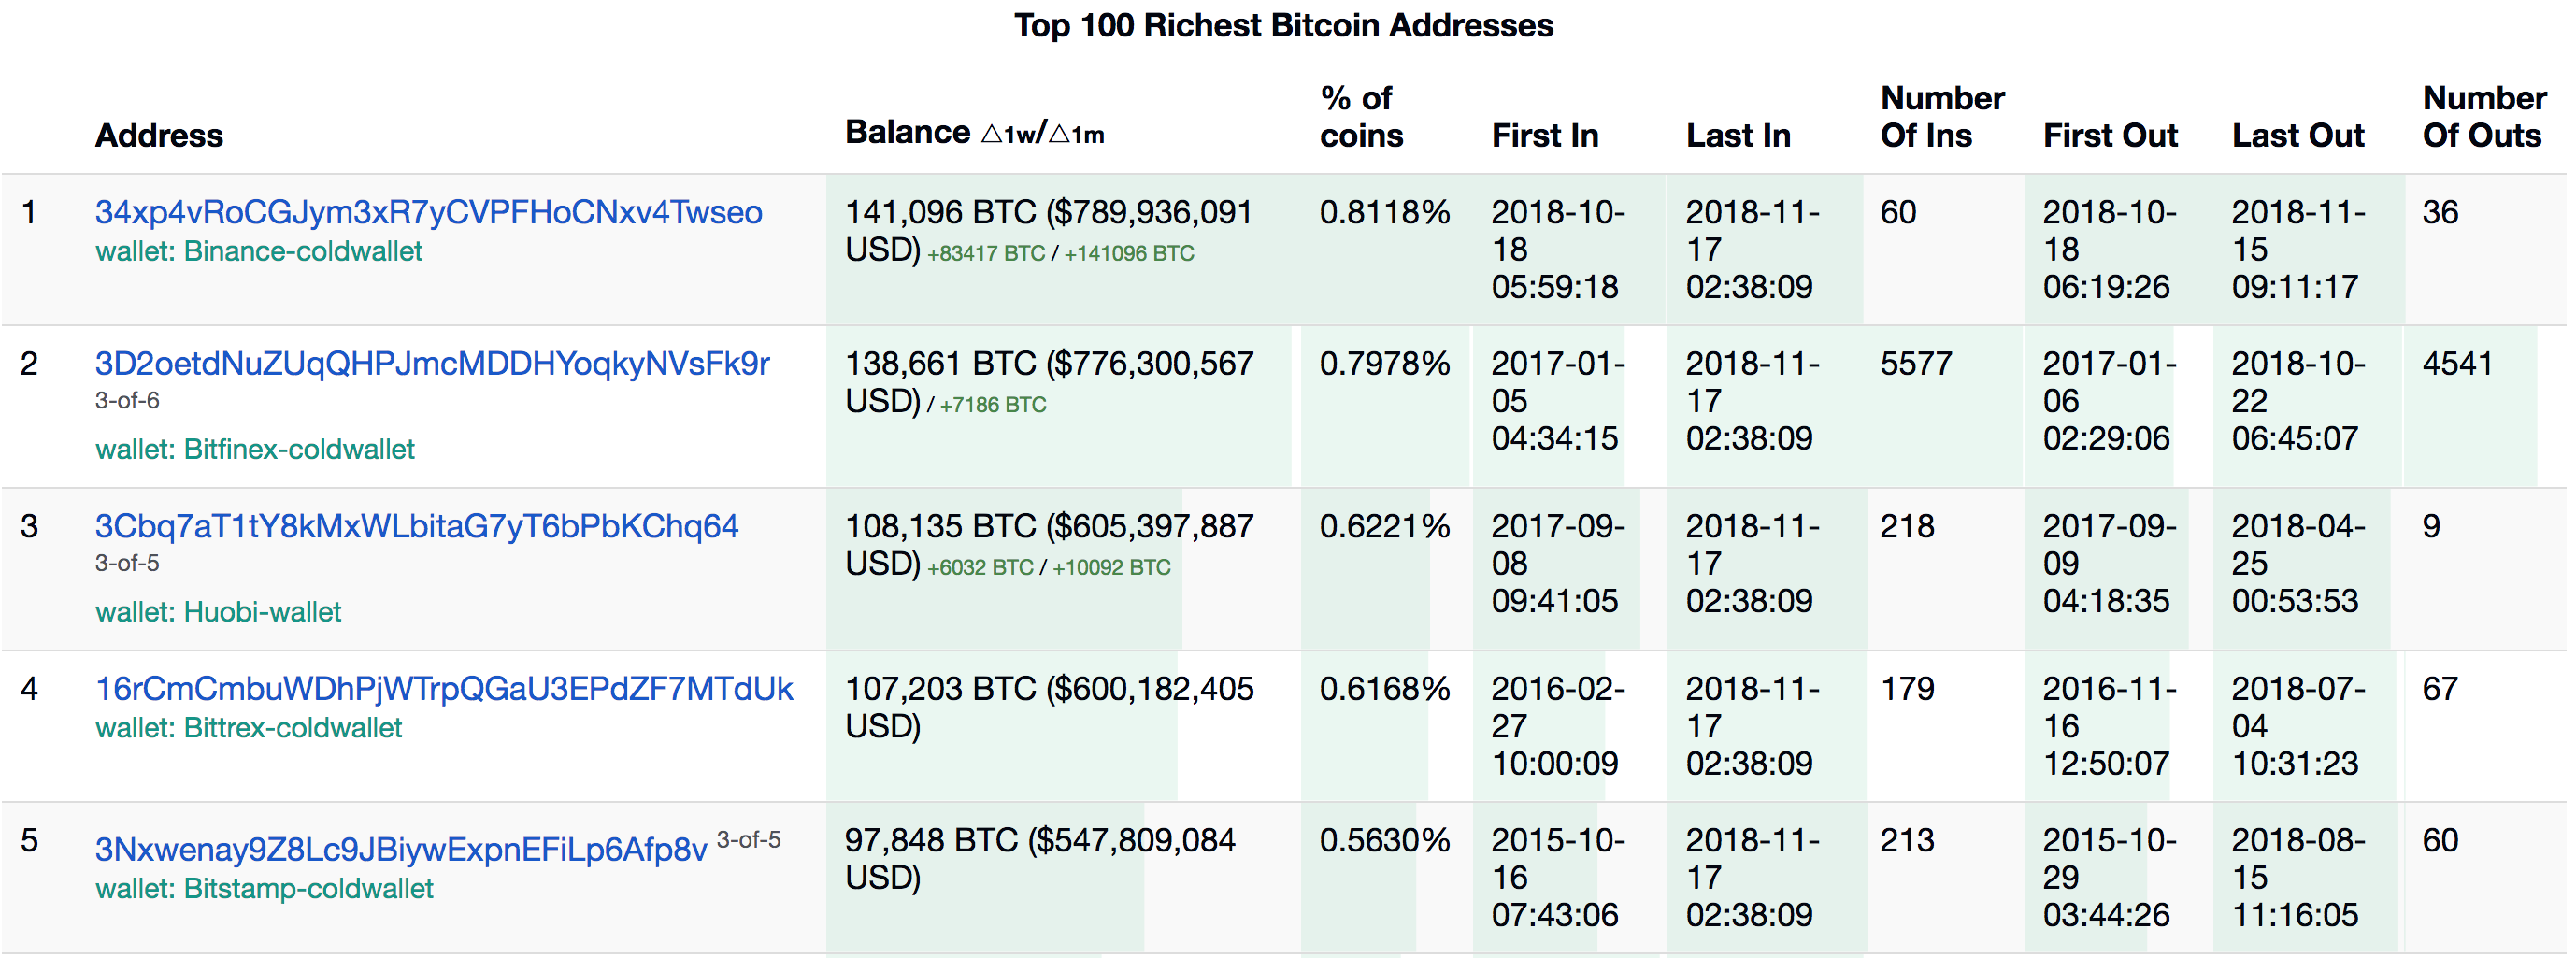 Top Richest Bitcoin Addresses and Bitcoin distribution